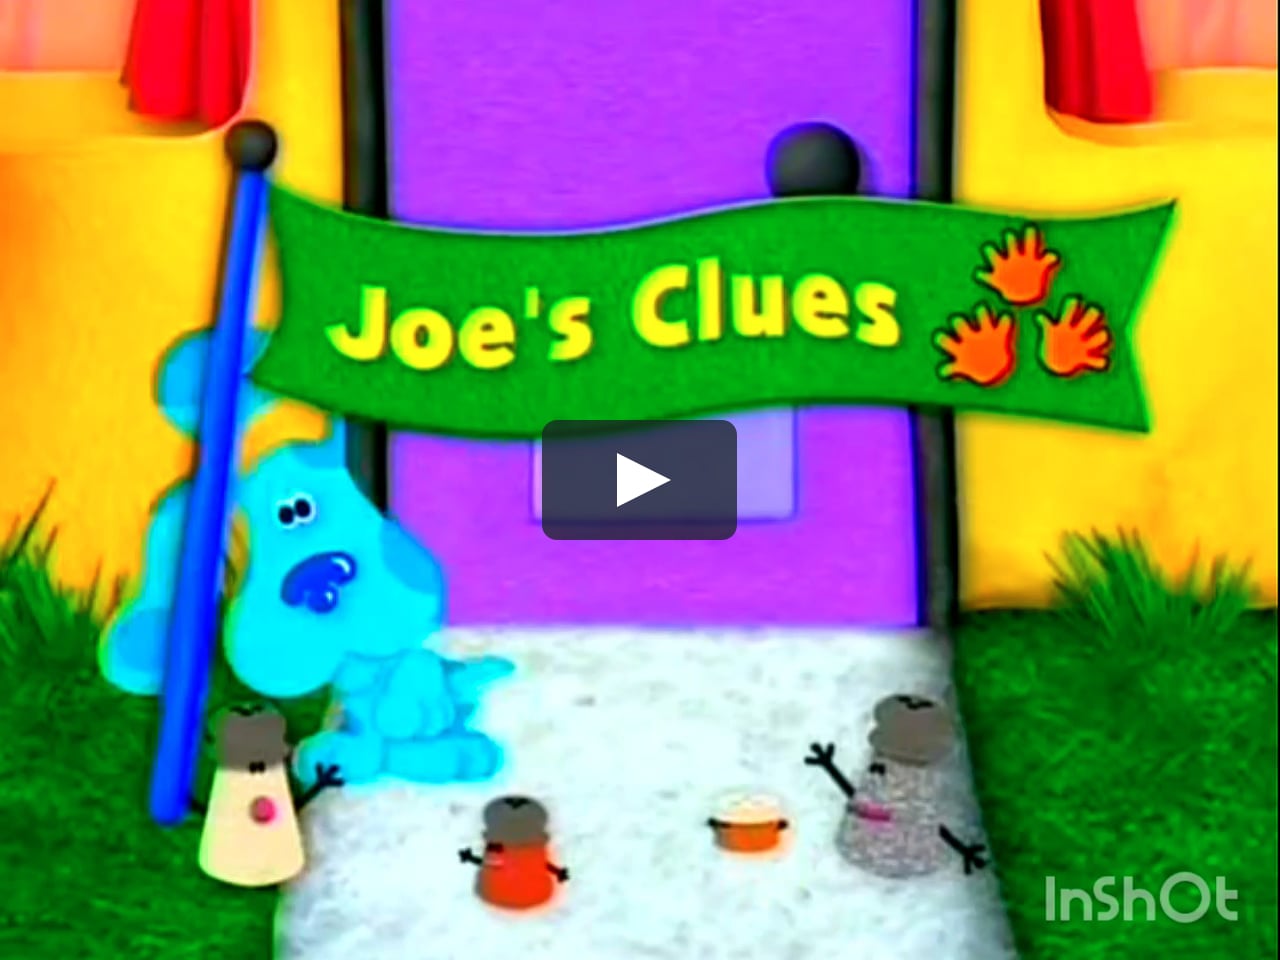 Blue's Clues videos - Dailymotion